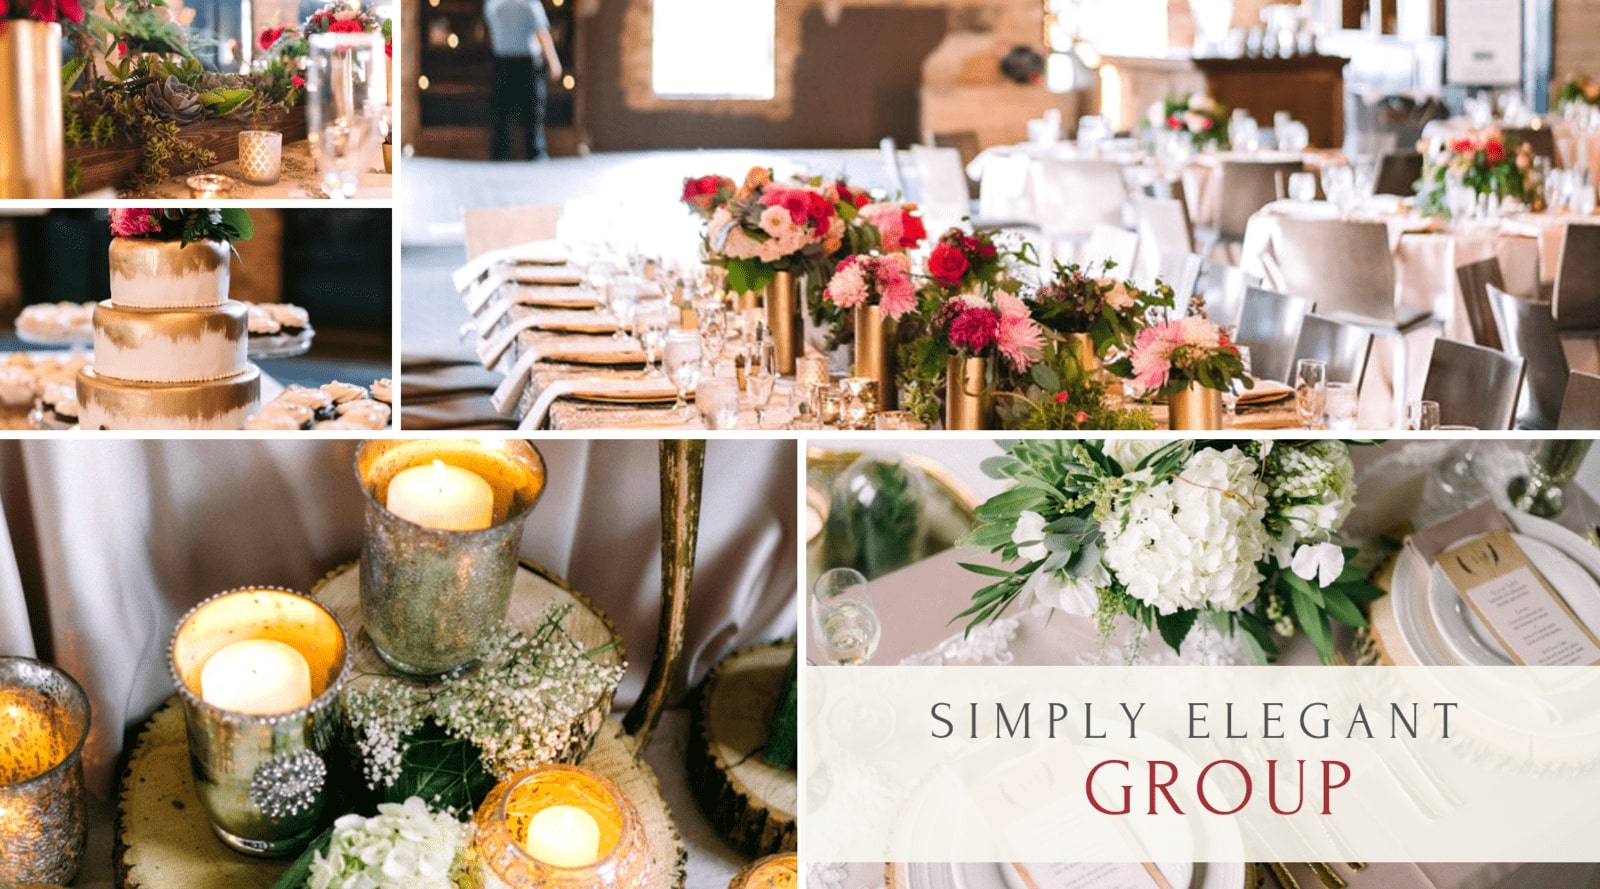 Today's Expert: Ashley Ebert from The Simply Elegant Group